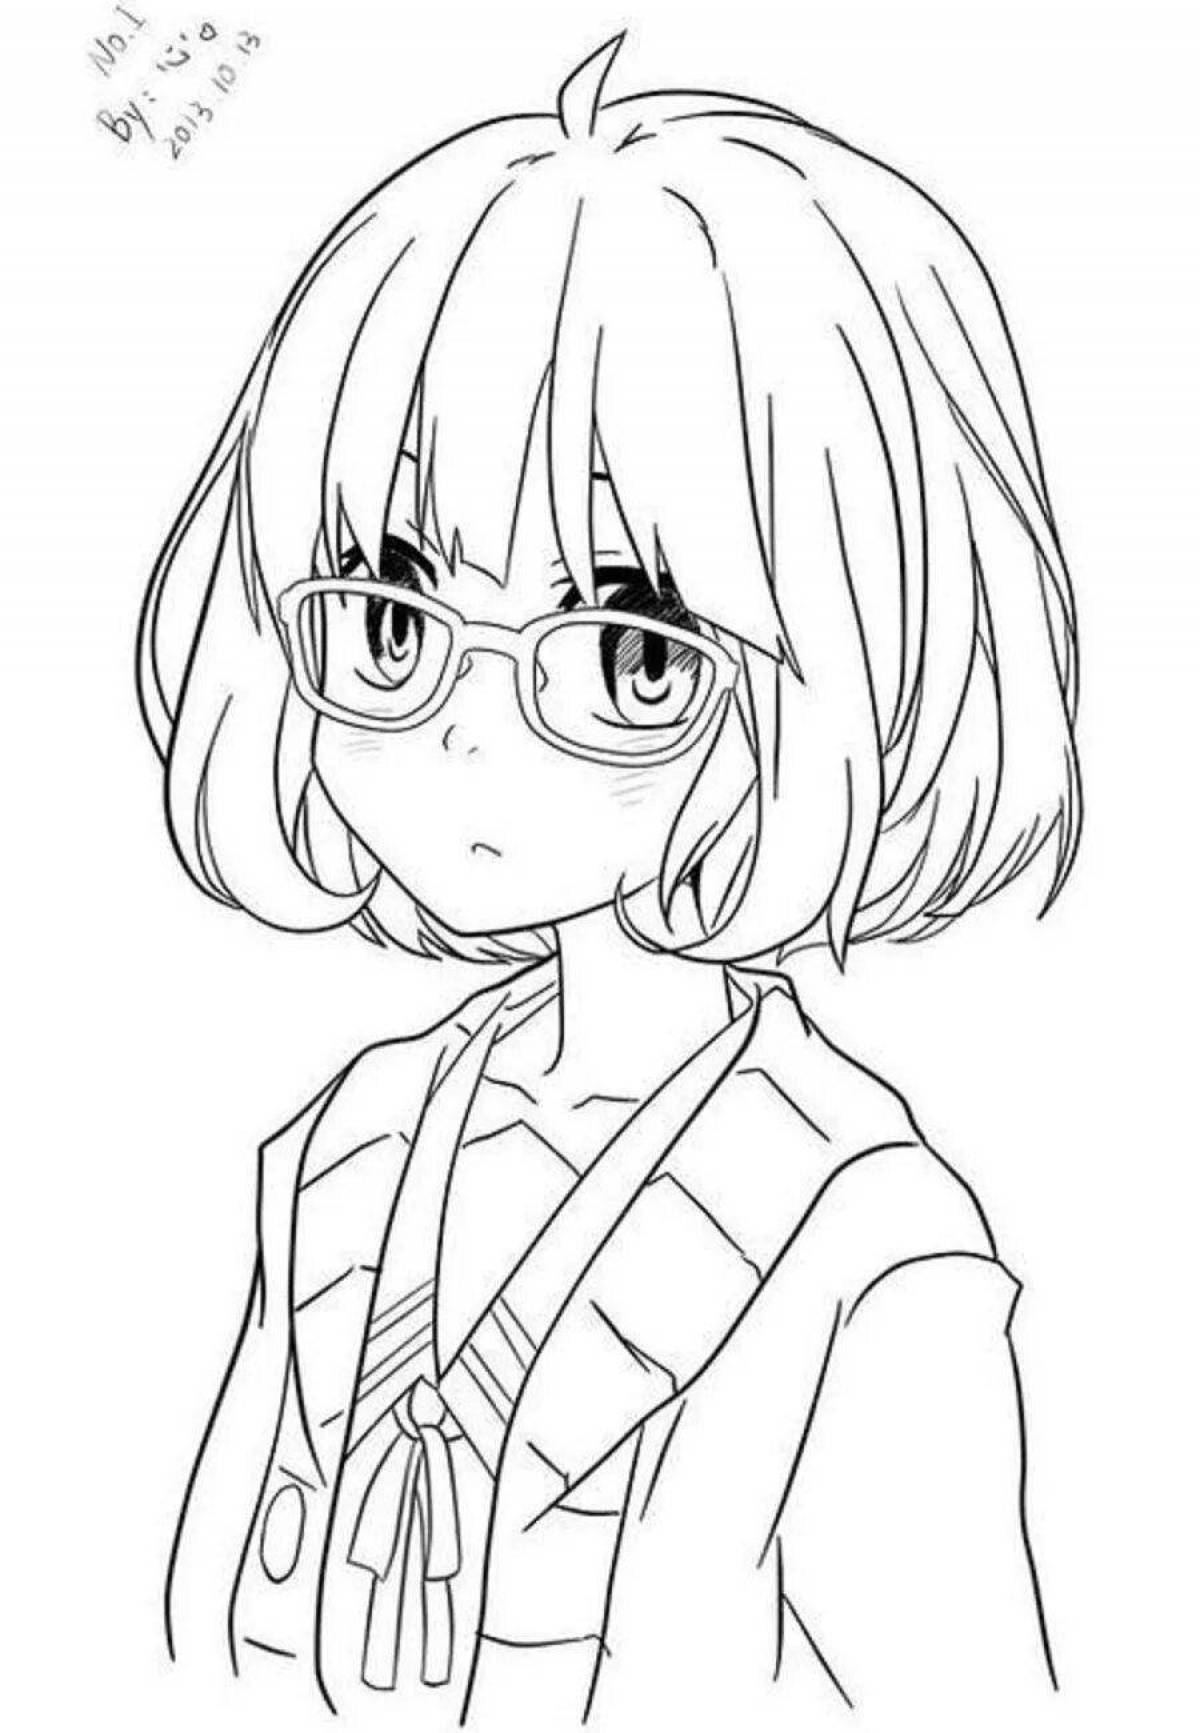 Colorful bw anime coloring page